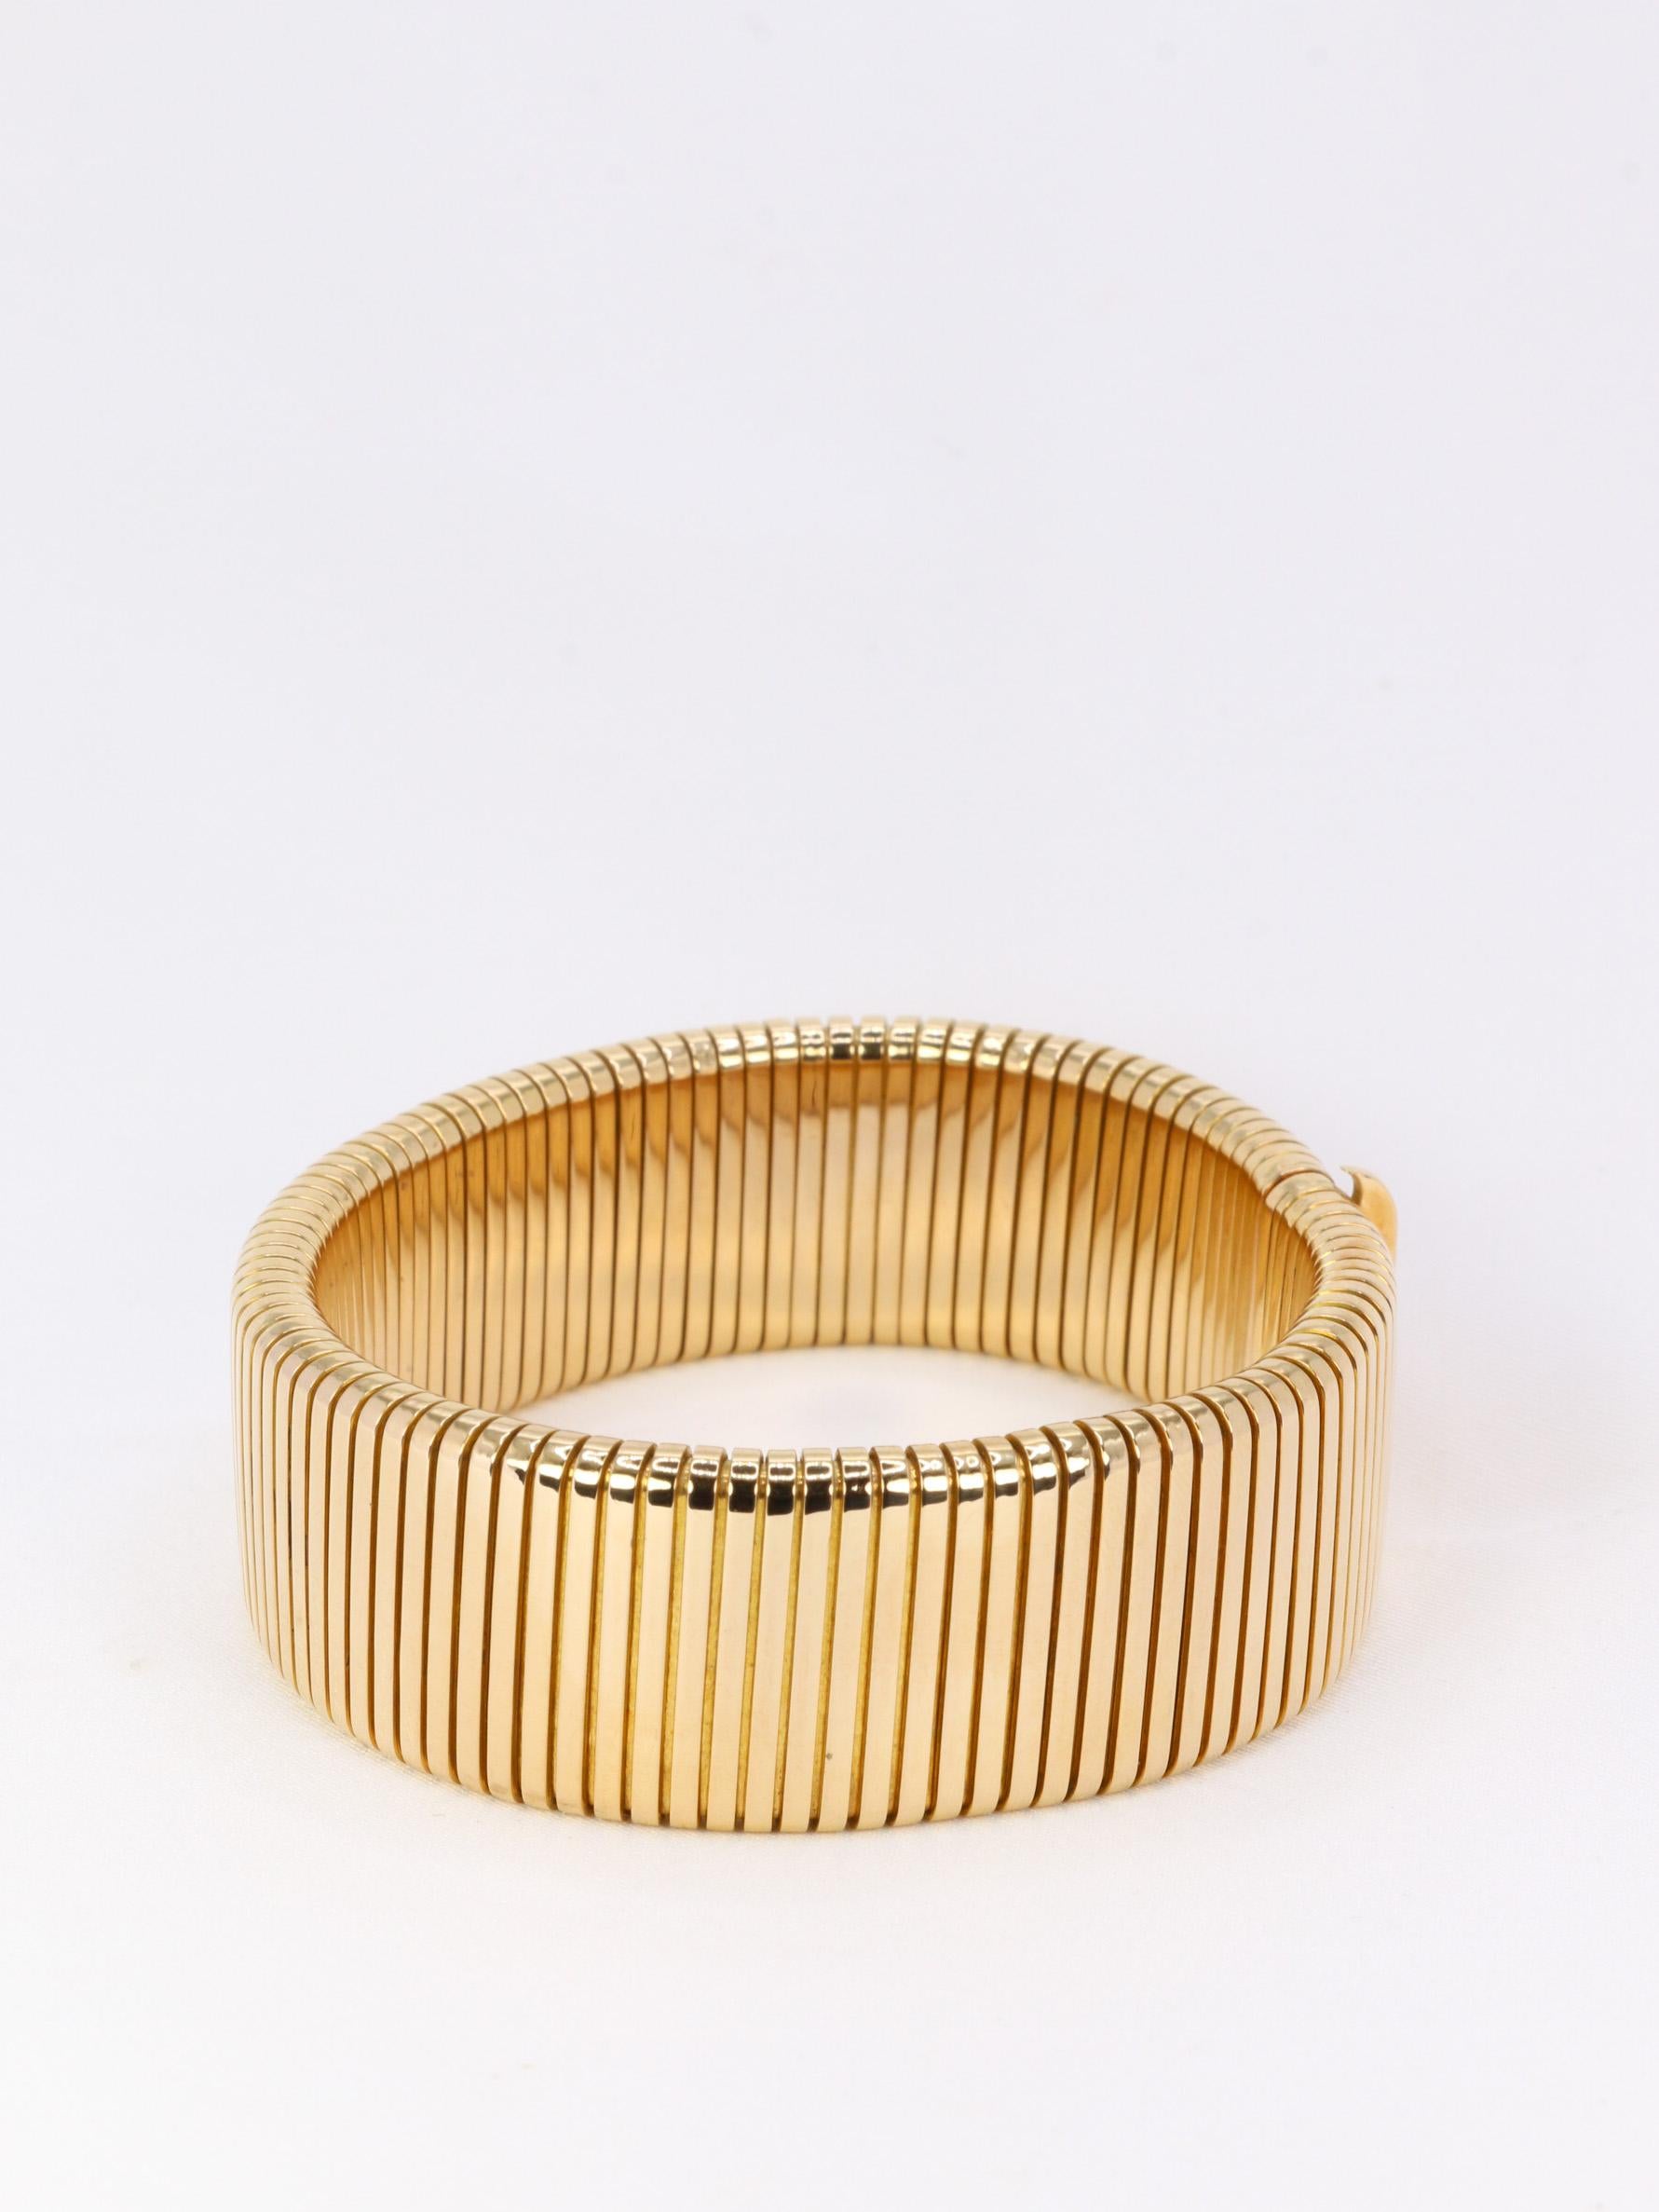 18Kt (750°/°°) yellow gold vintage Tubogas bracelet. The quality of this bracelet is exceptional, it is supple without being fragile and is in perfect condition.
French work from the 1970s.
Presence of the eagle head hallmark for 18Kt